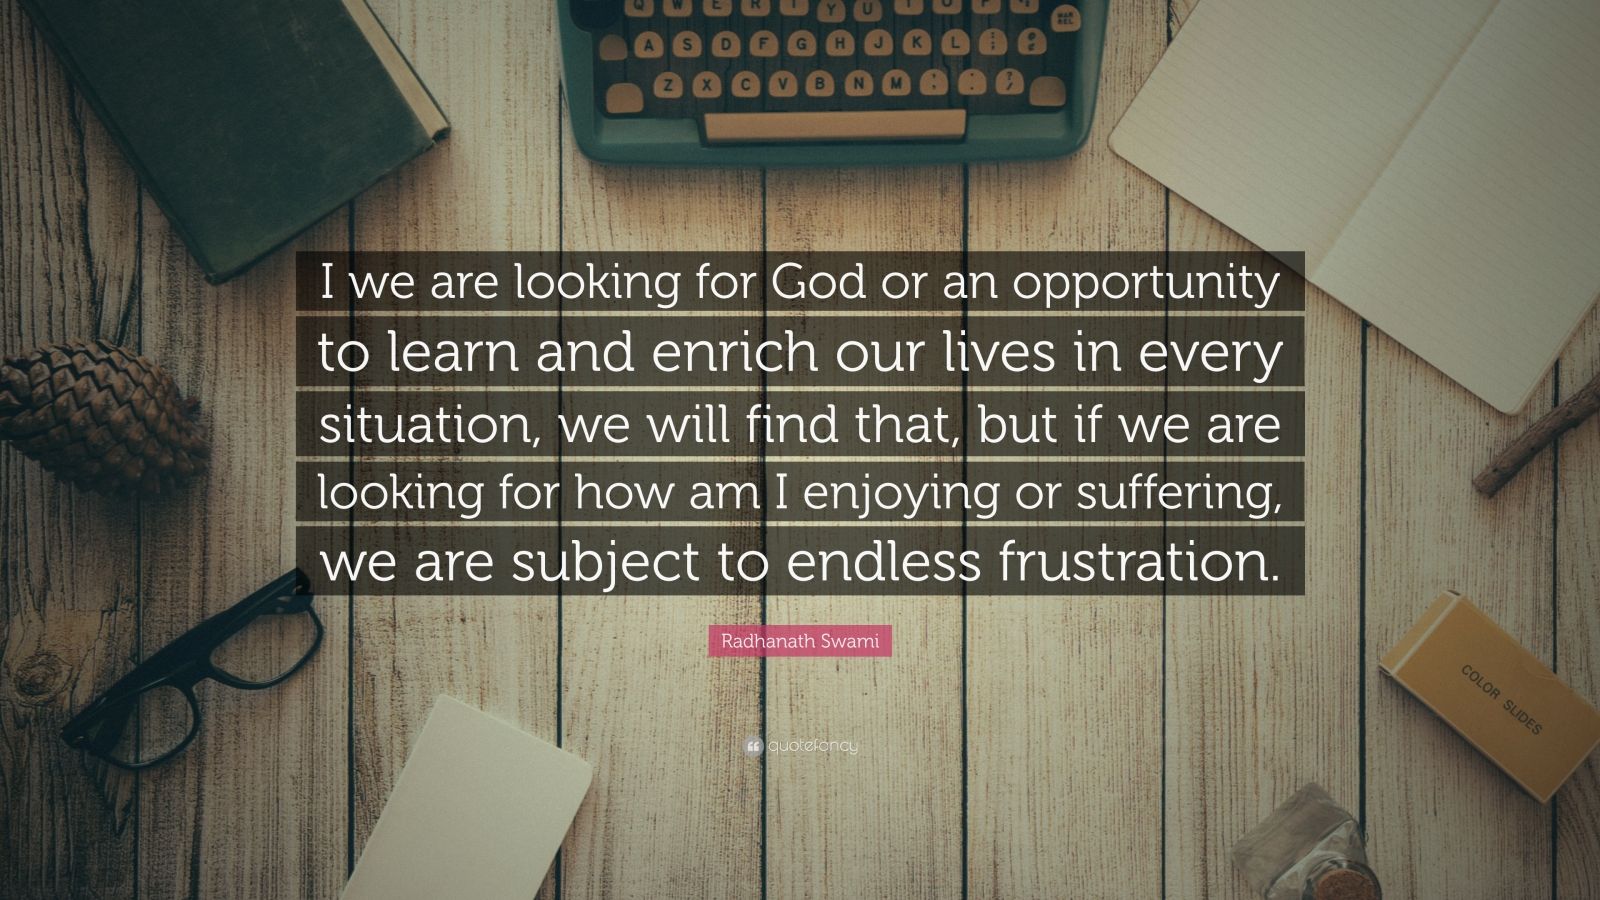 Radhanath Swami Quote: “I we are looking for God or an opportunity to